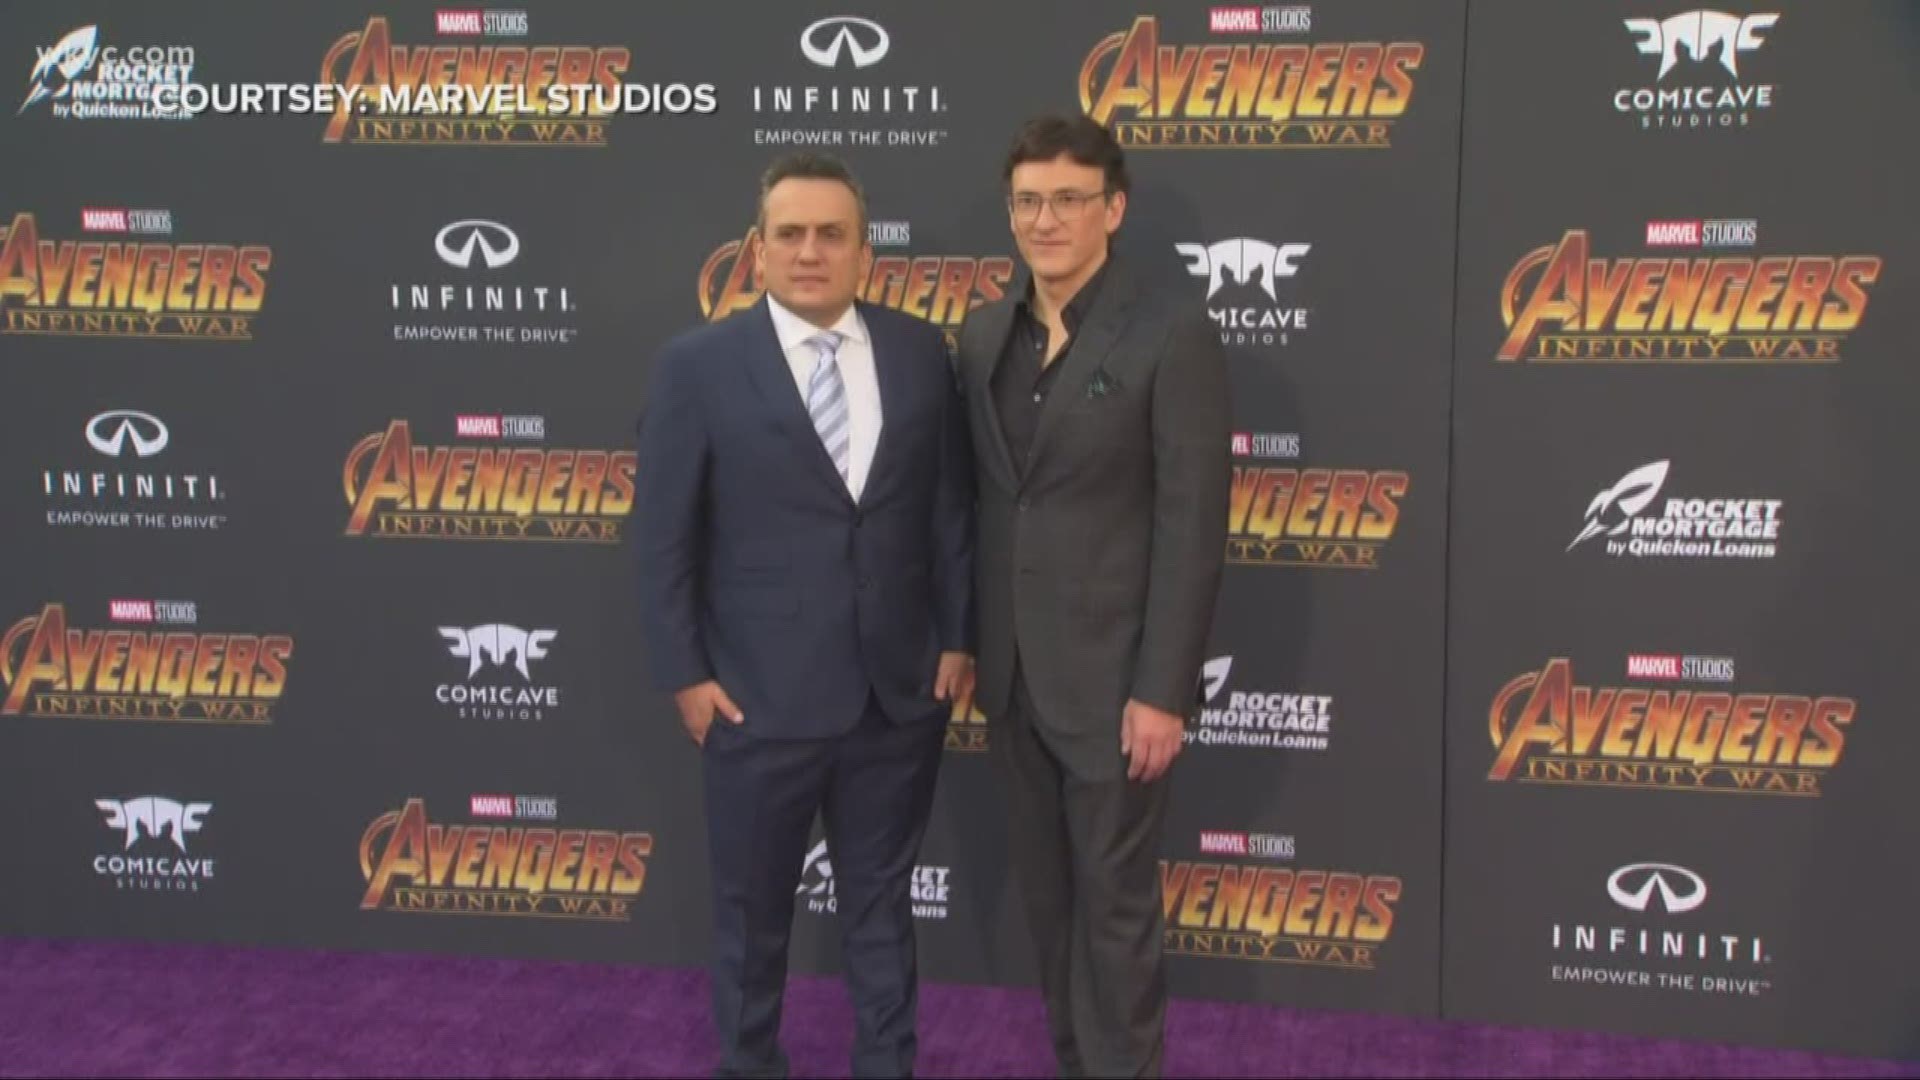 Cleveland natives Joe and Anthony Russo are breaking their silence on Martin Scorsese's criticism of Marvel movies. They say 'nobody owns cinema.'